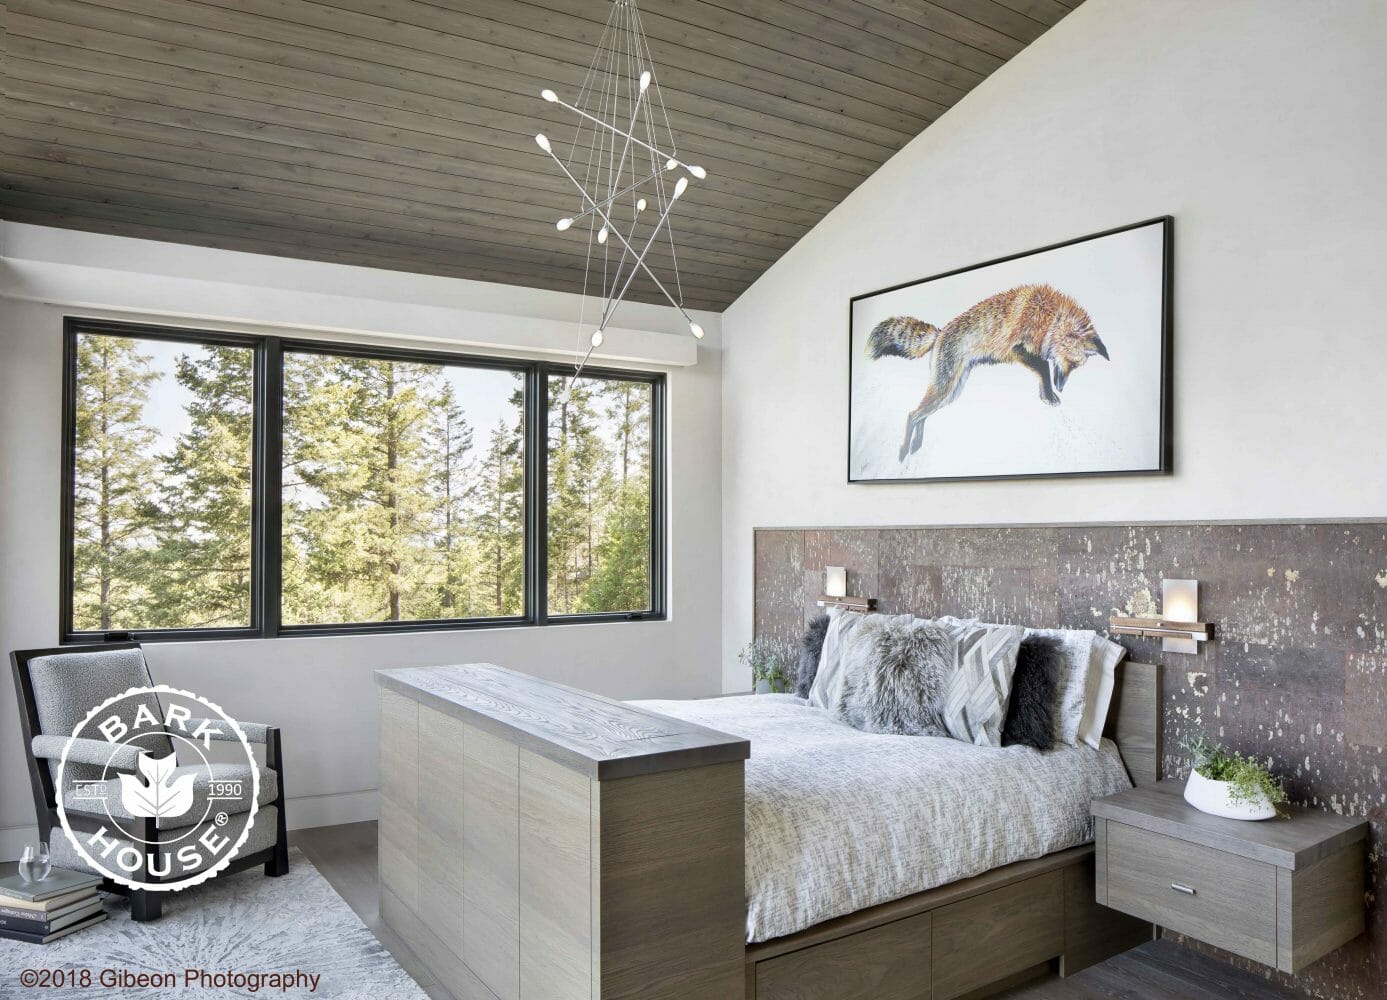 Bark House White Pine Paneling in Whitefish MT - Bedroom wall